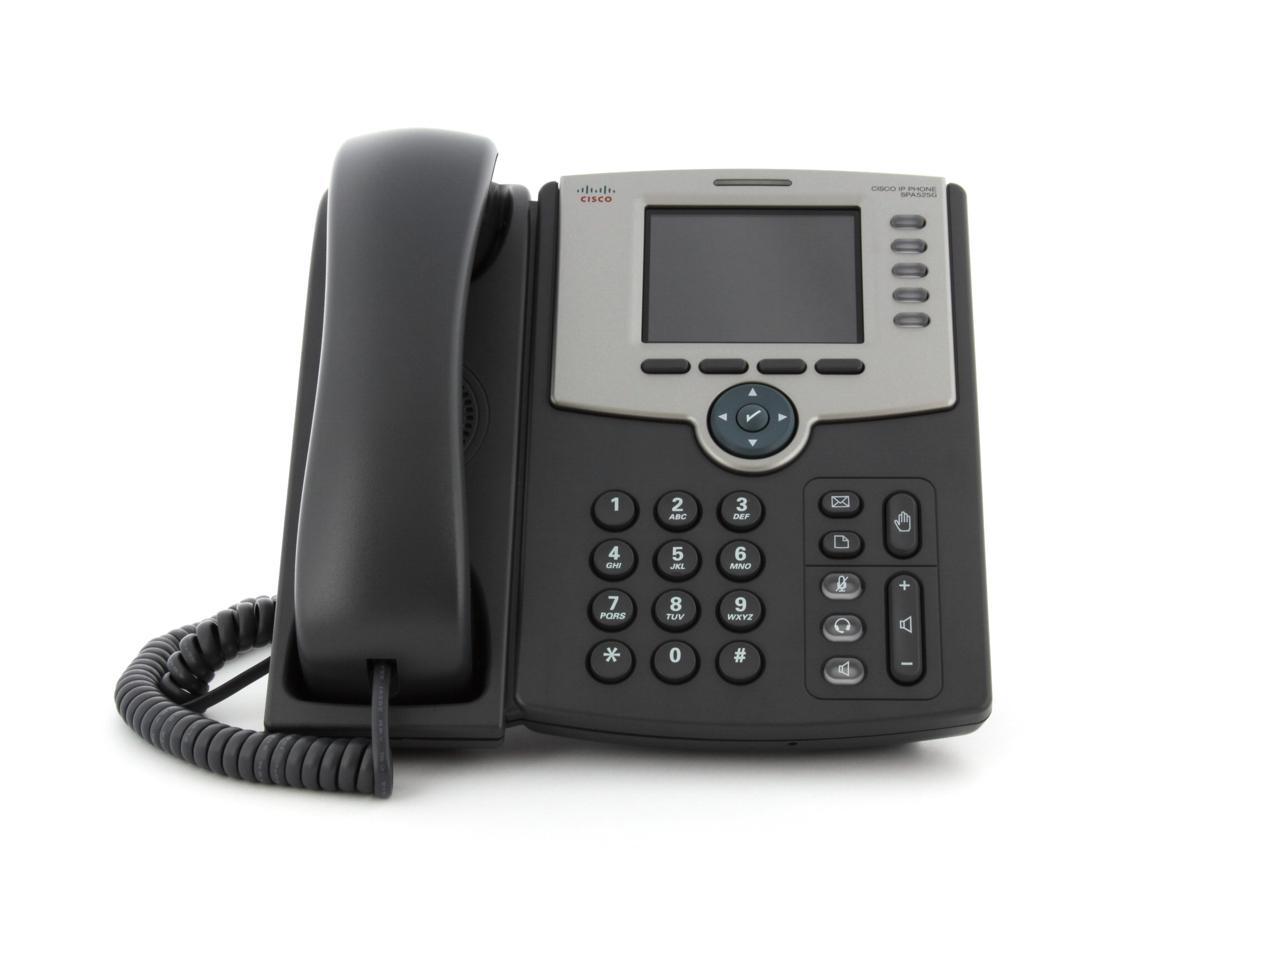 Cisco SPA 525G2 5-Line IP Phone with Color Display, PoE, 802.11g, Bluetooth, Mobile Link 